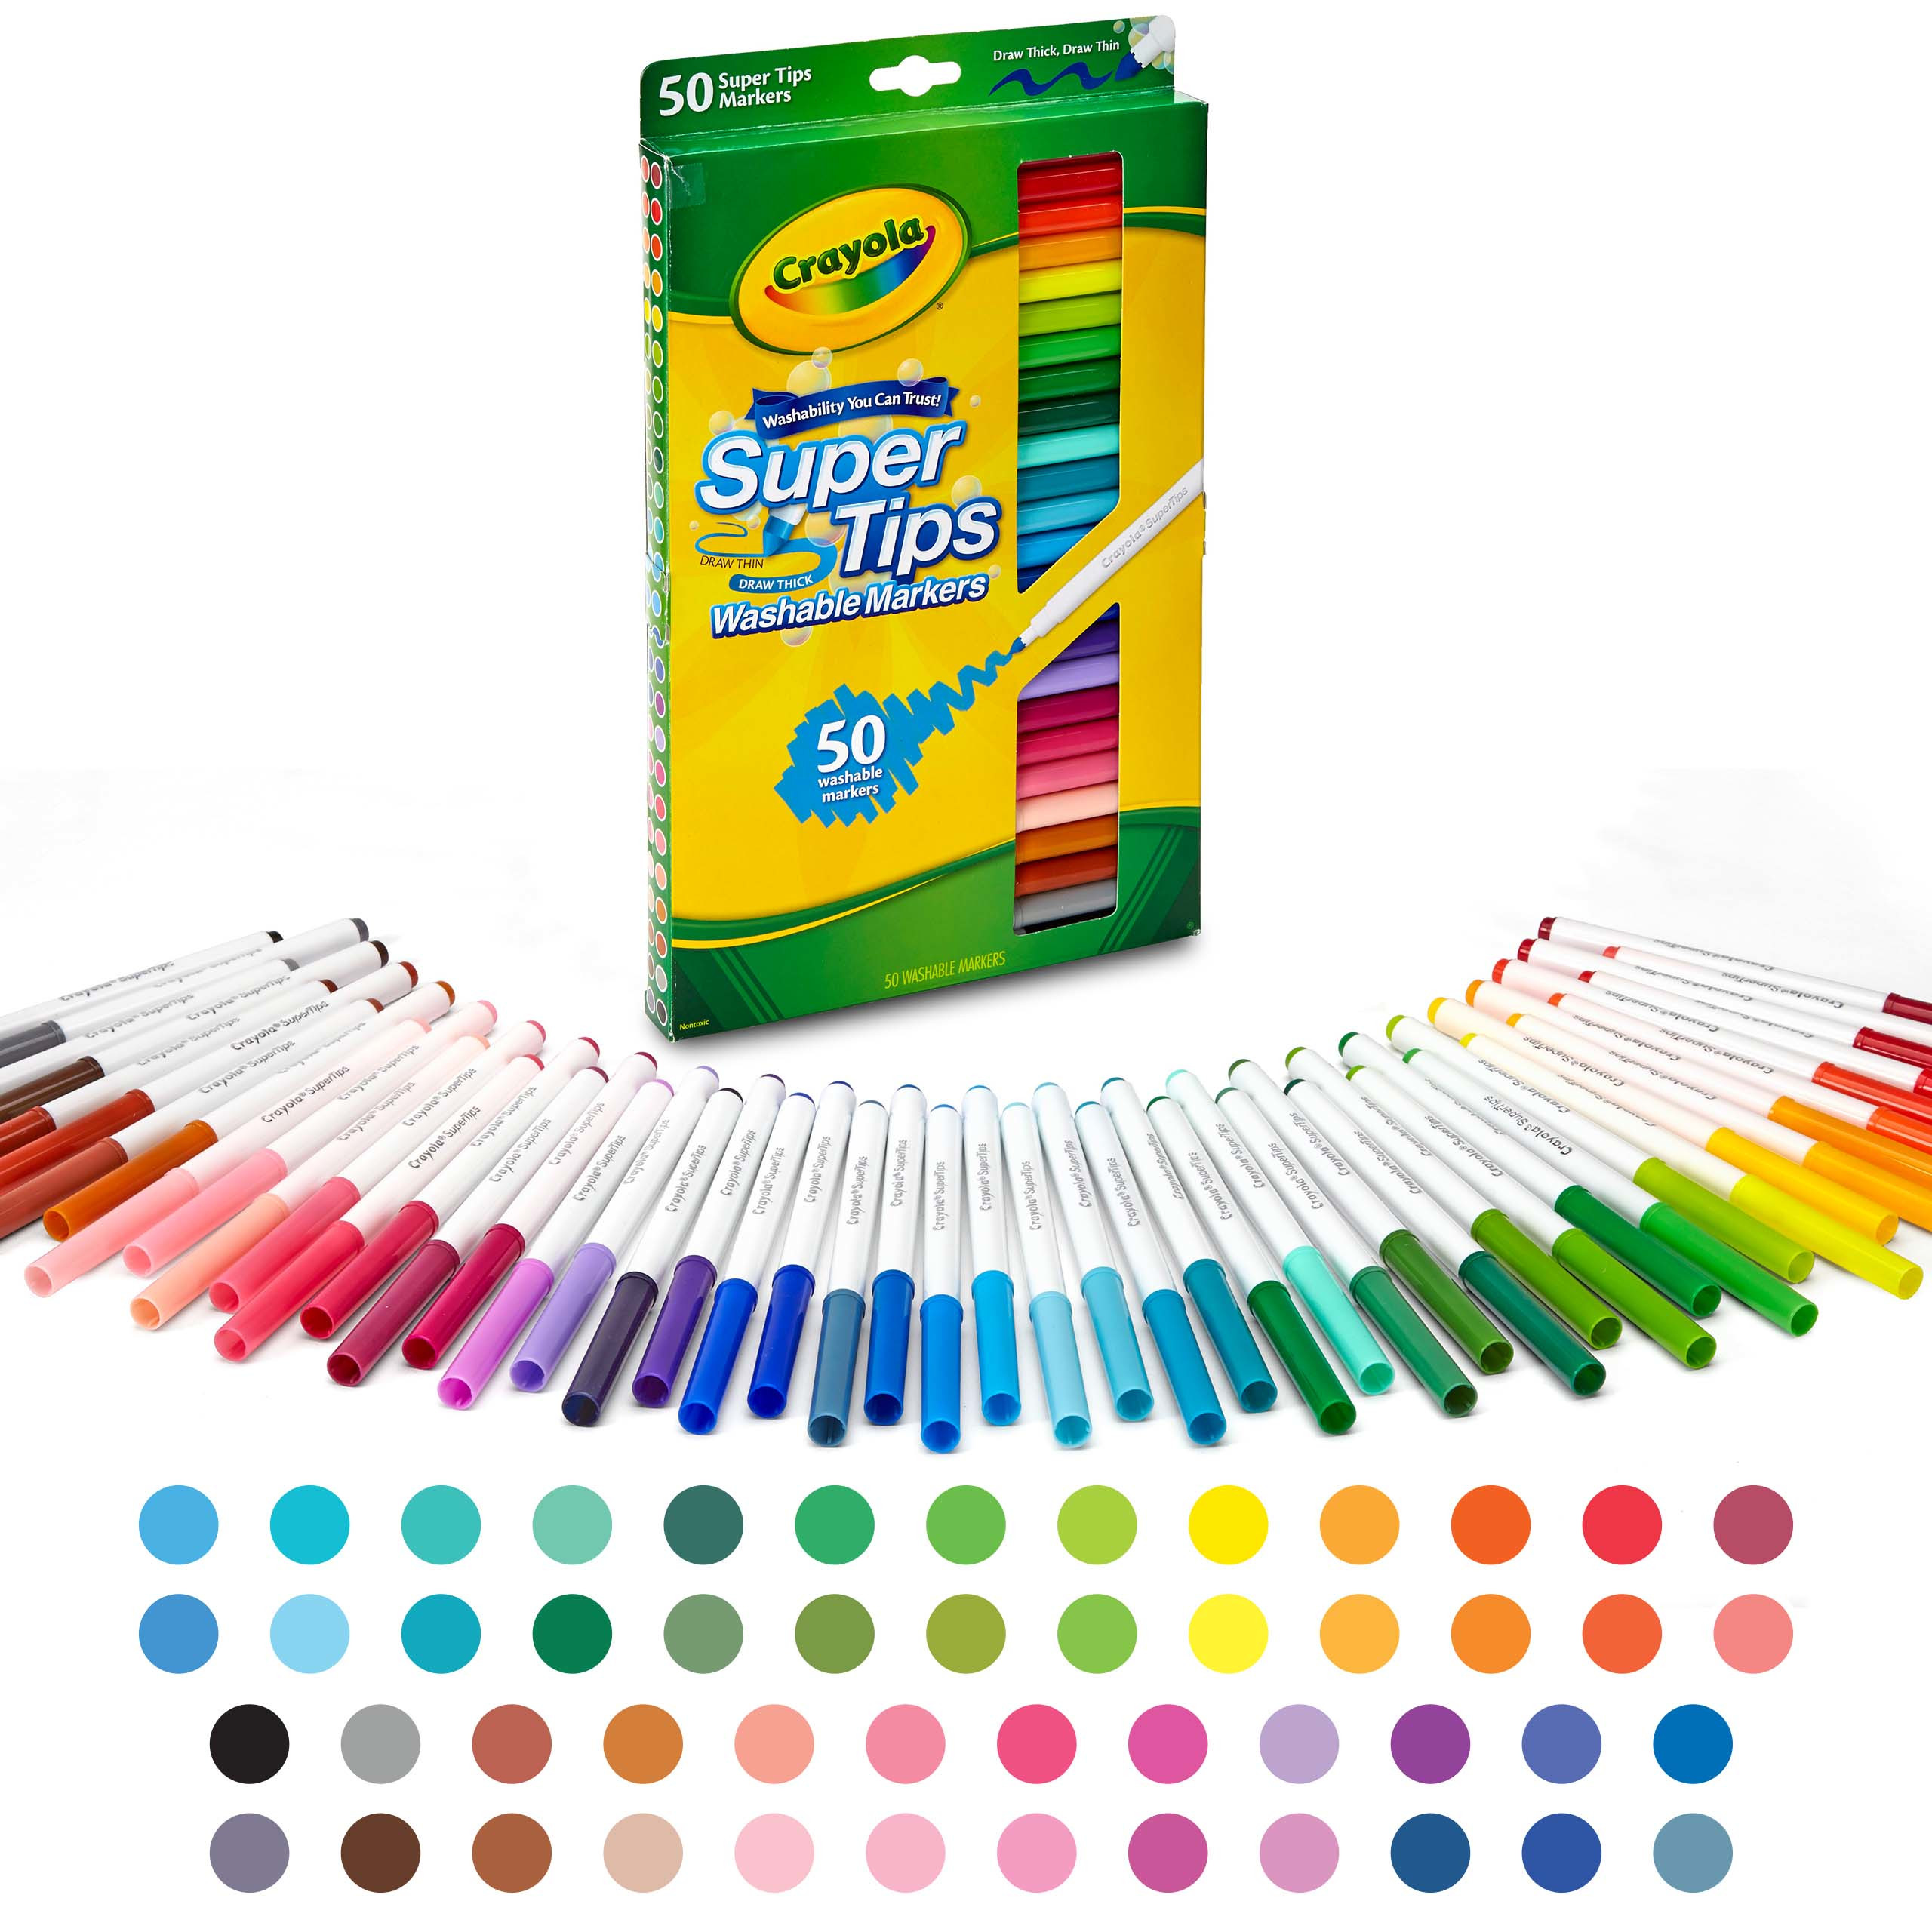 Crayola Super Tips Washable Markers, Back to School Supplies, Art Toys, 50 Assorted Colors, Child - image 1 of 8